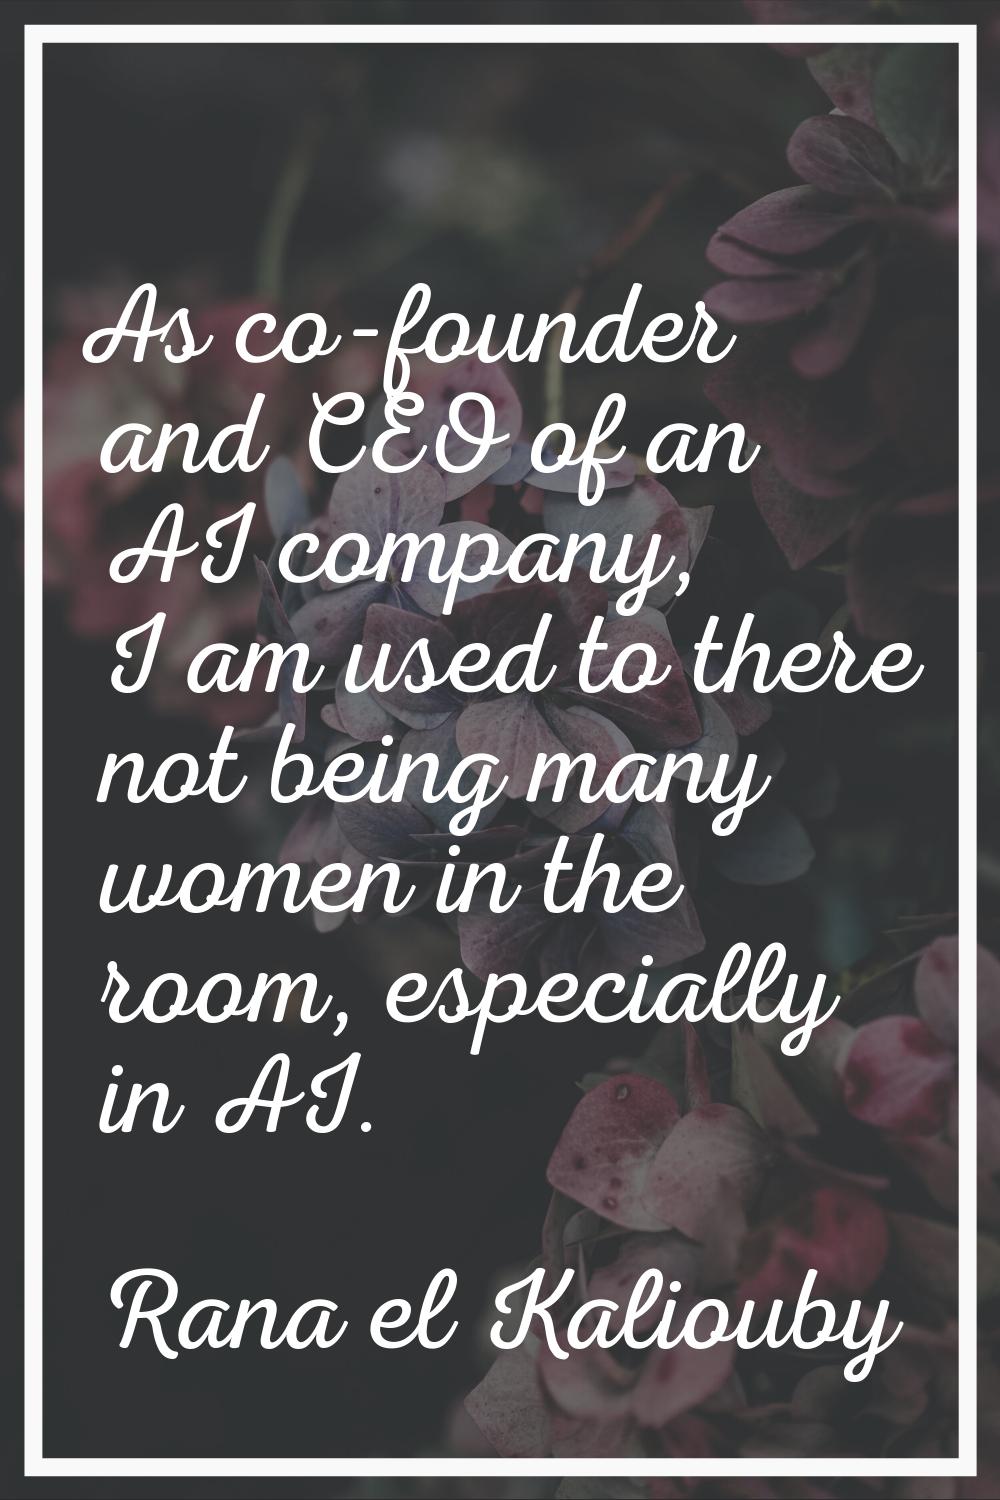 As co-founder and CEO of an AI company, I am used to there not being many women in the room, especi